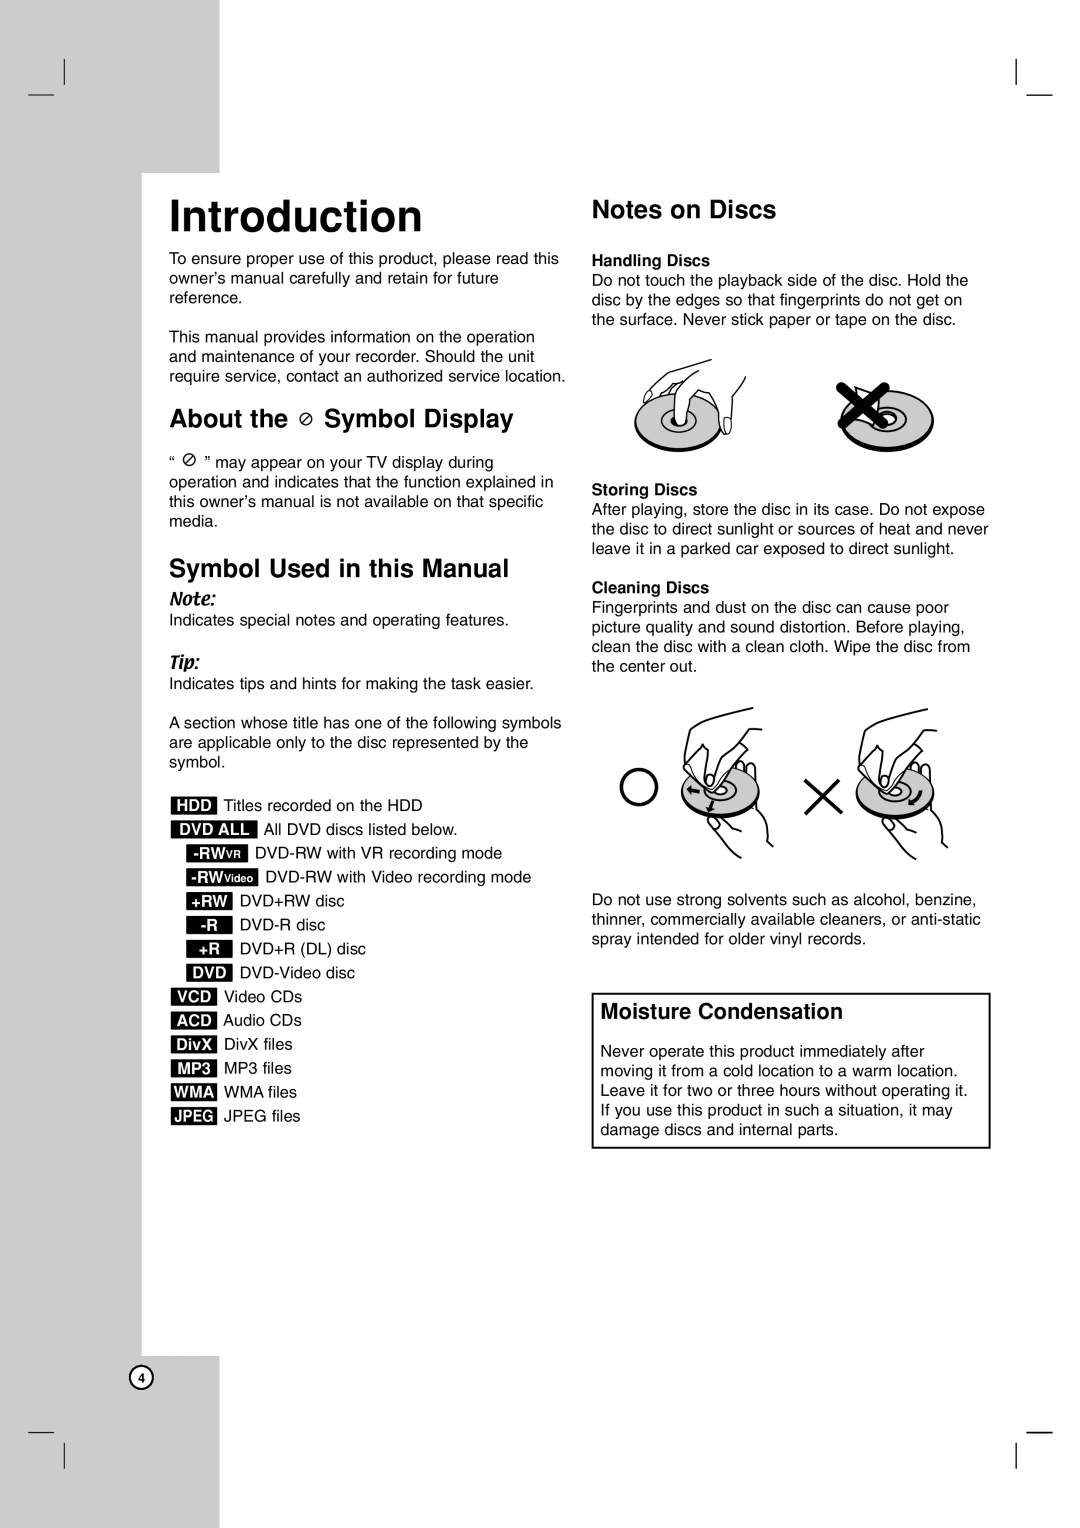 NEC NDH-81 Introduction, About the Symbol Display, Symbol Used in this Manual, Notes on Discs, Moisture Condensation 